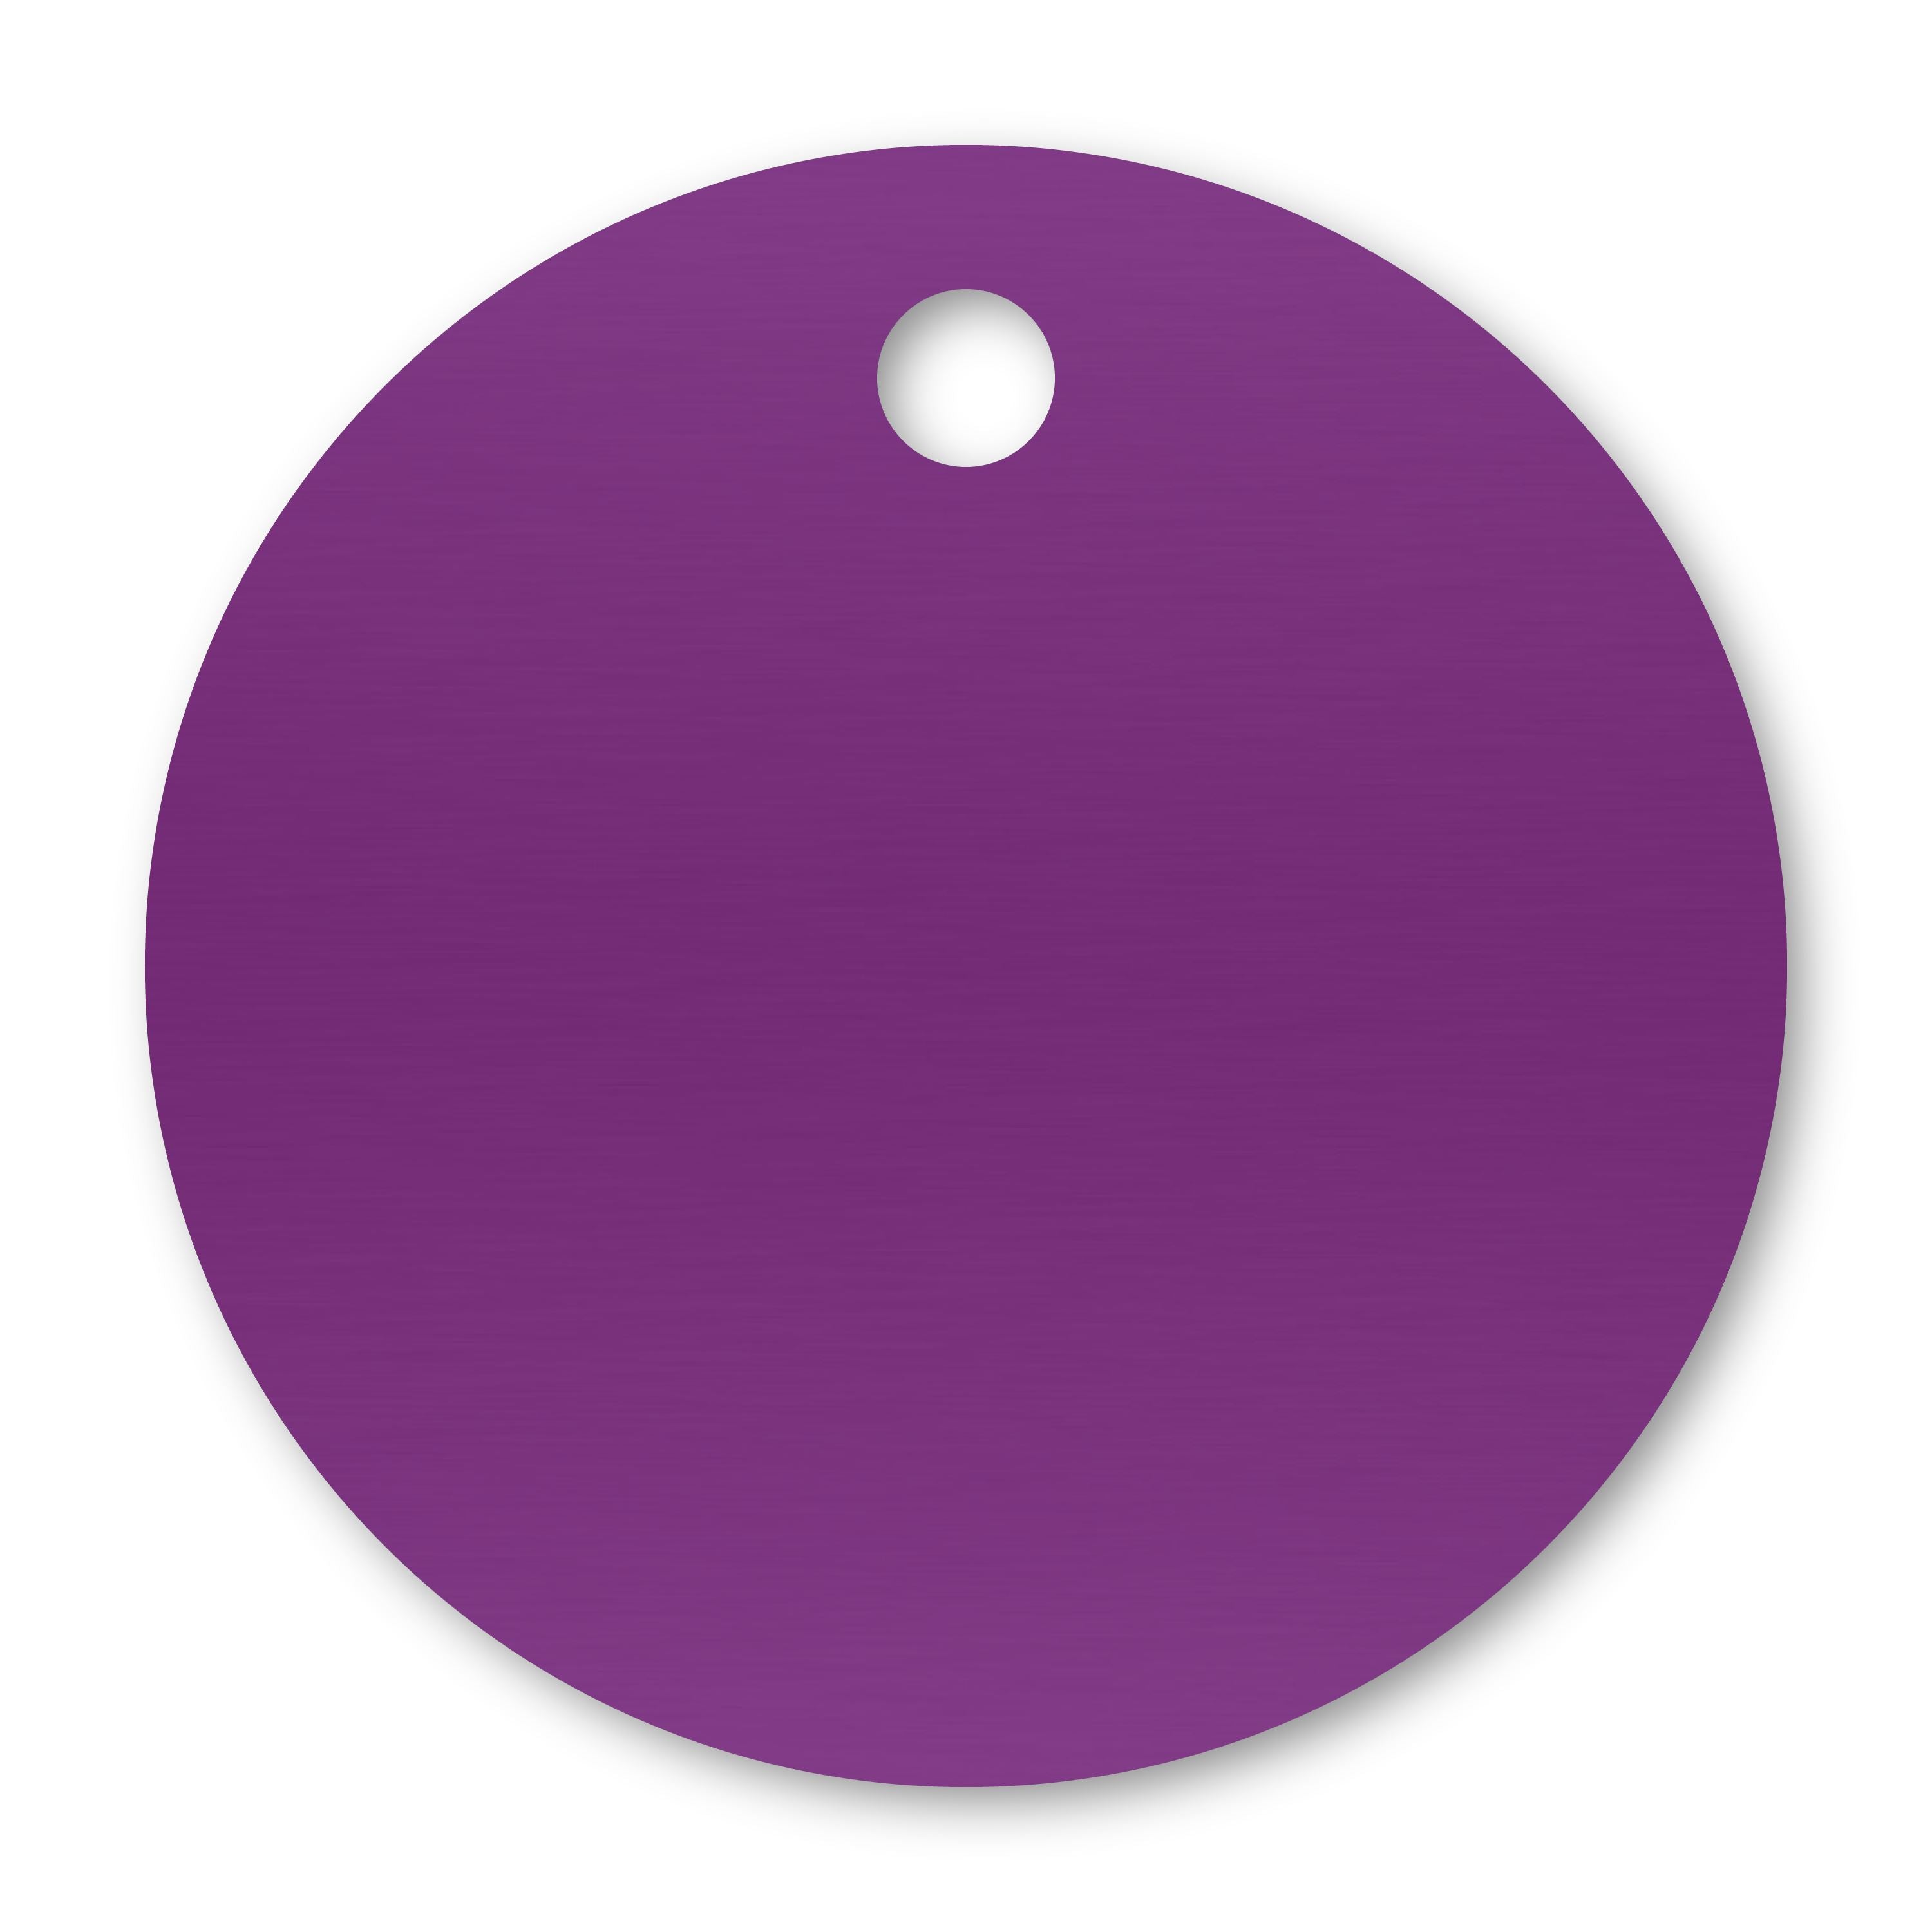 Anodized Aluminum Round Tags, 1-1/8" with 1/8" Hole, Laser Engraved Metal Tags Craftworks NW Purple 